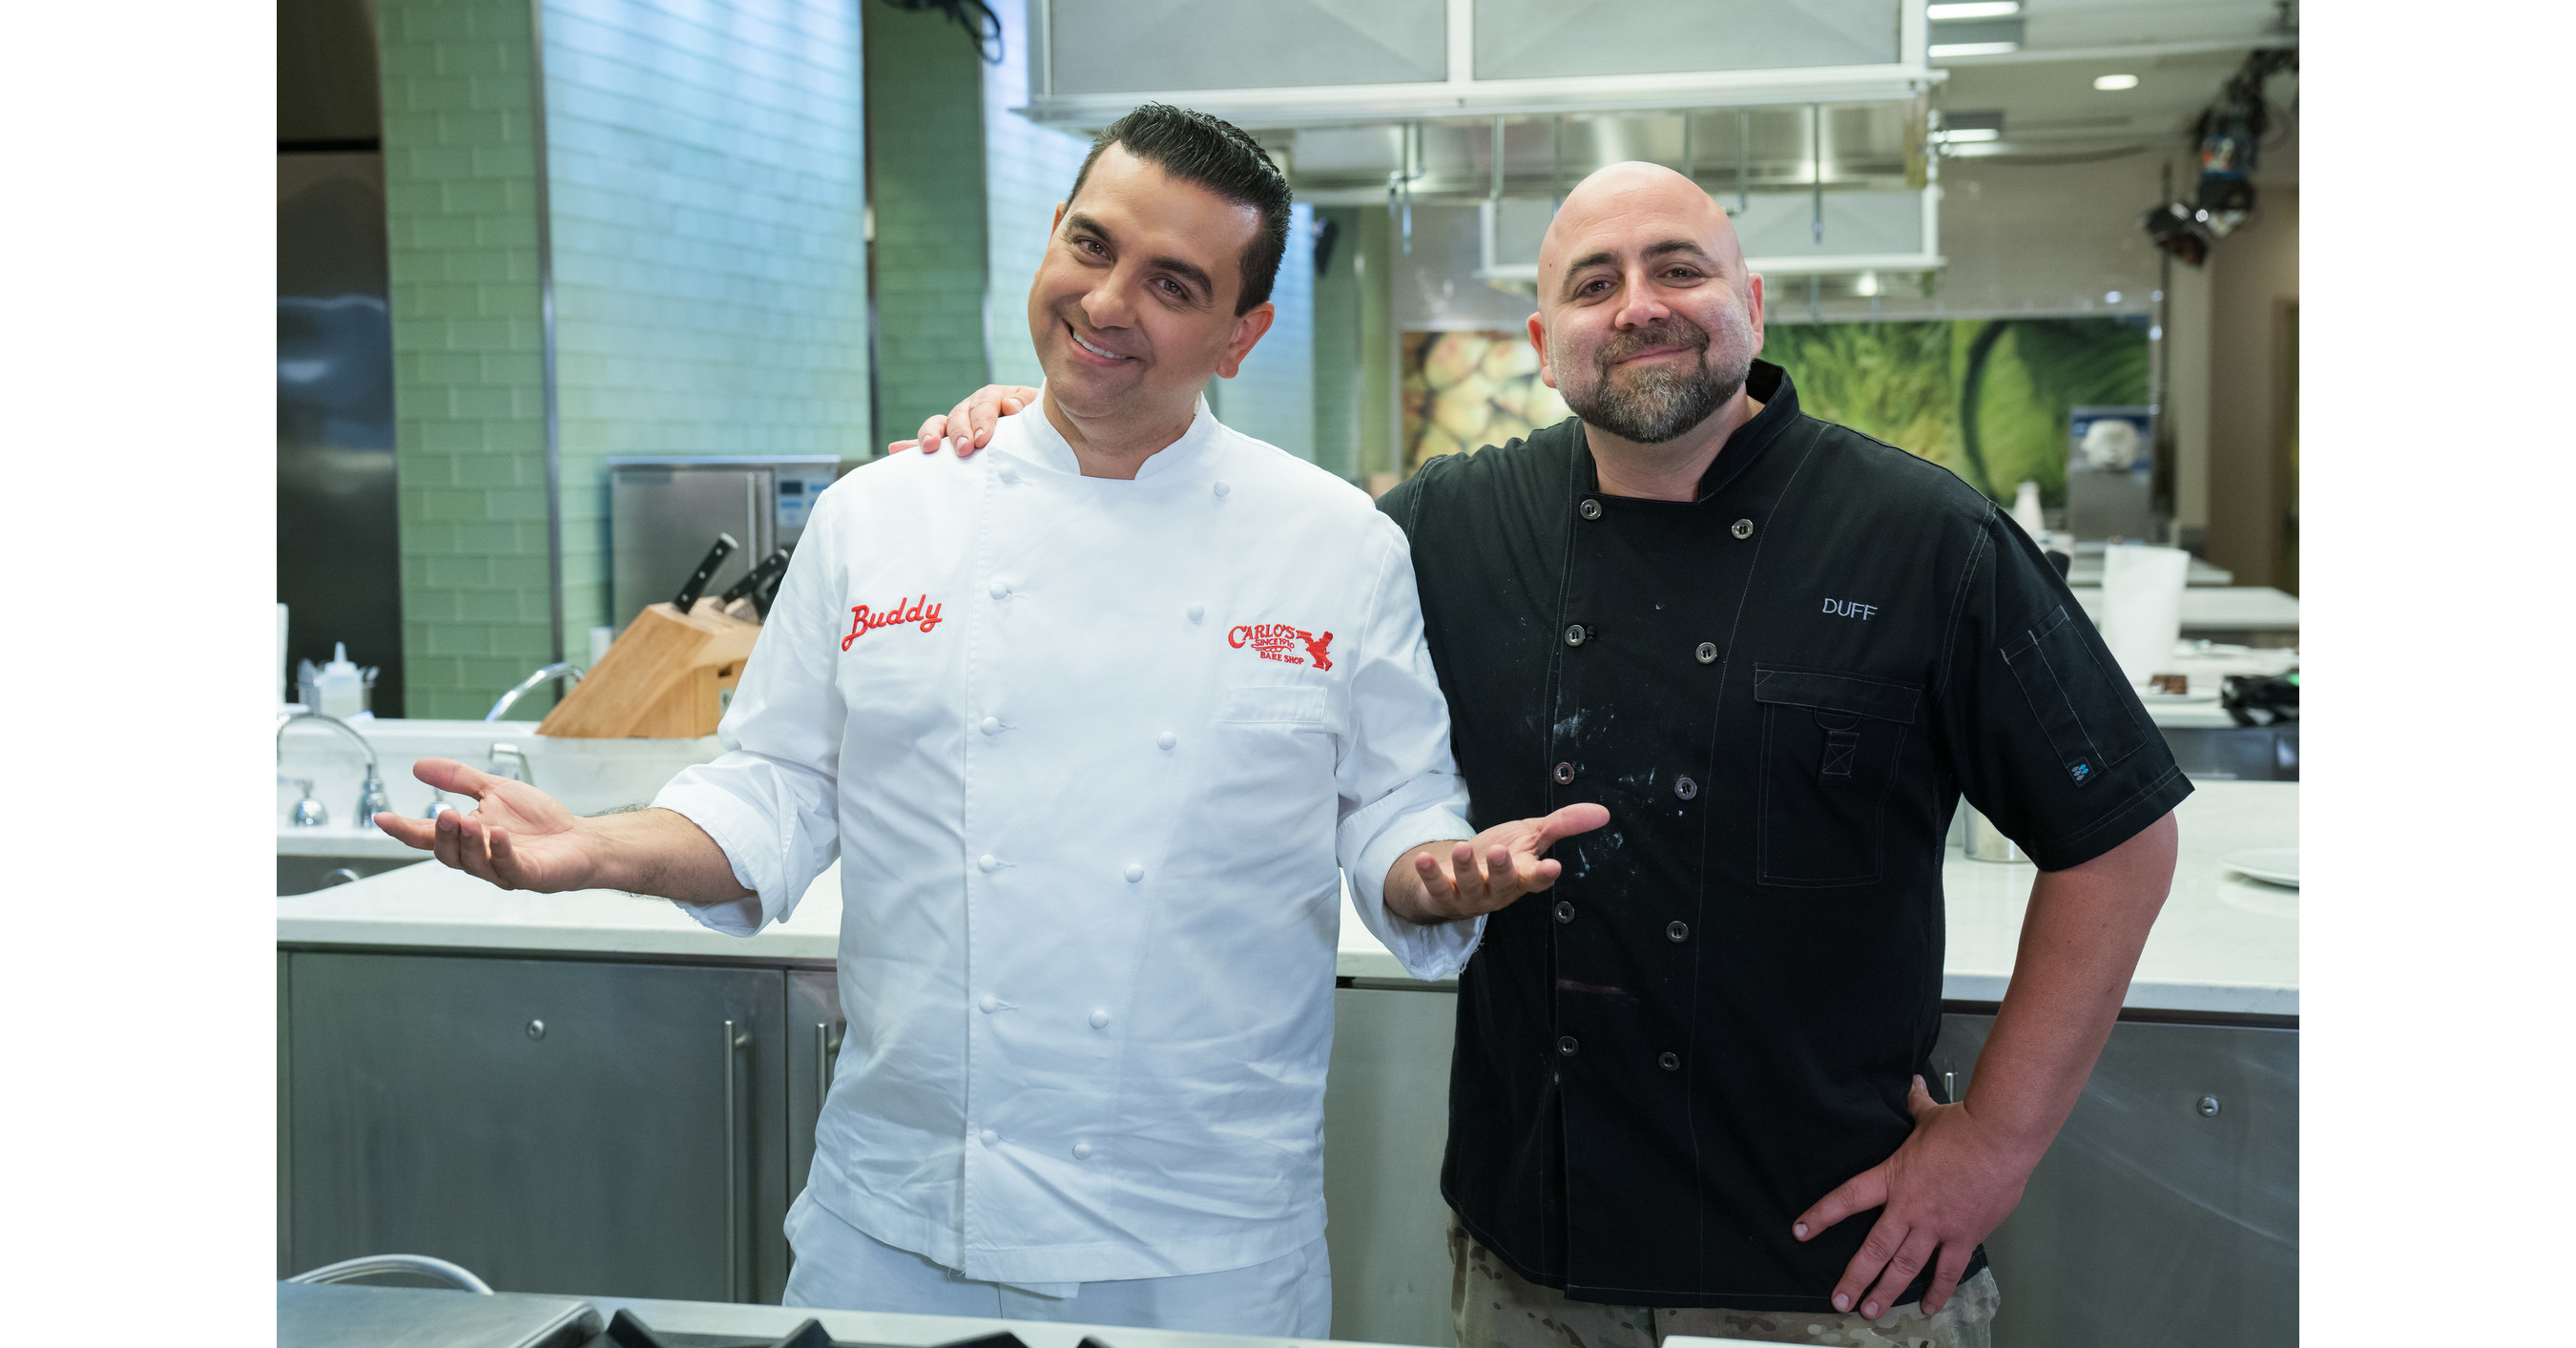 Longtime Rivals Duff Goldman And Buddy Valastro Battle In The Ultimate Baking On Food New Series Buddy Vs. Duff